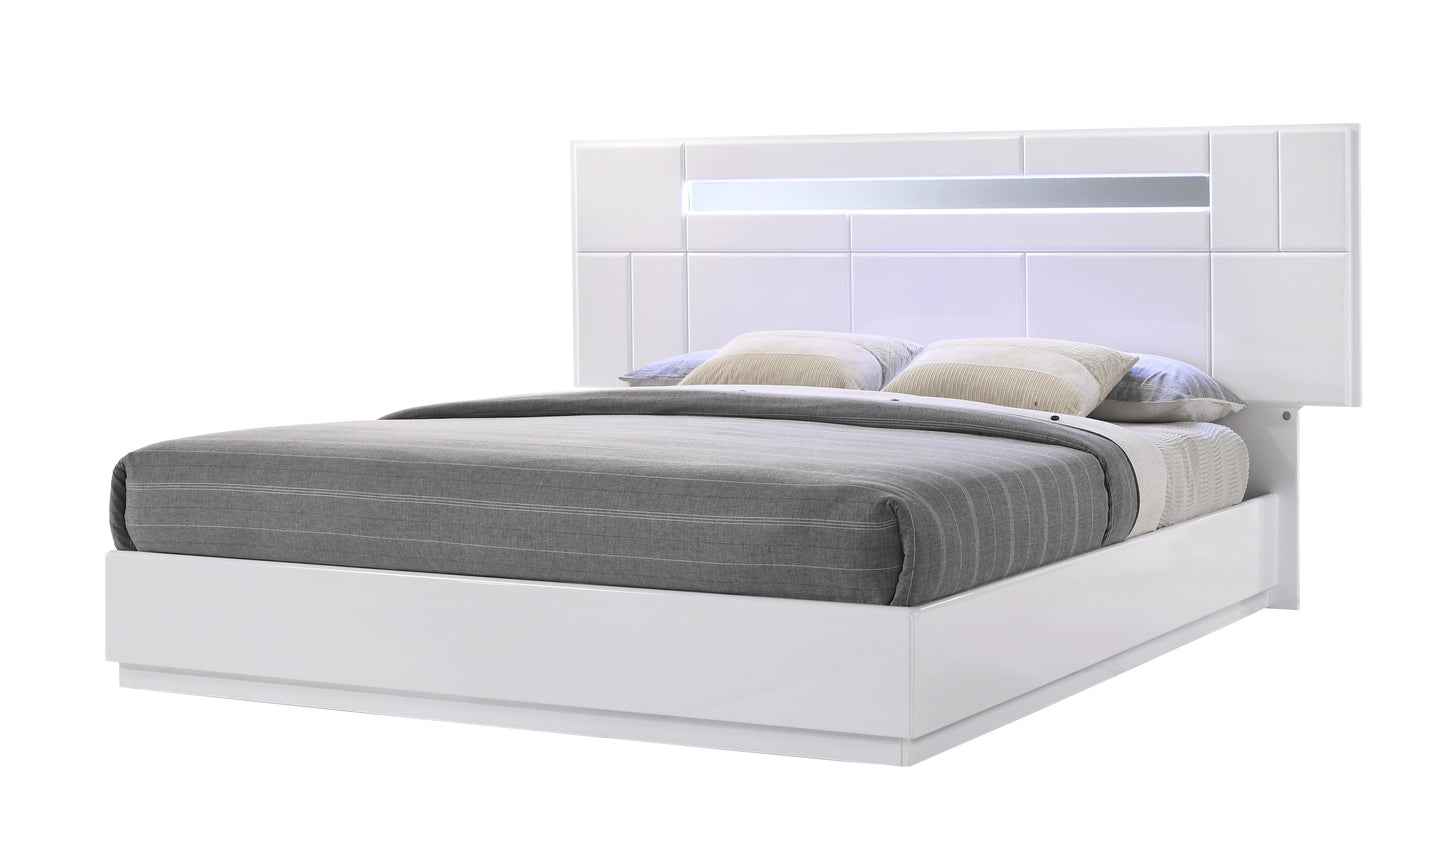 Palermo King Bed by JM